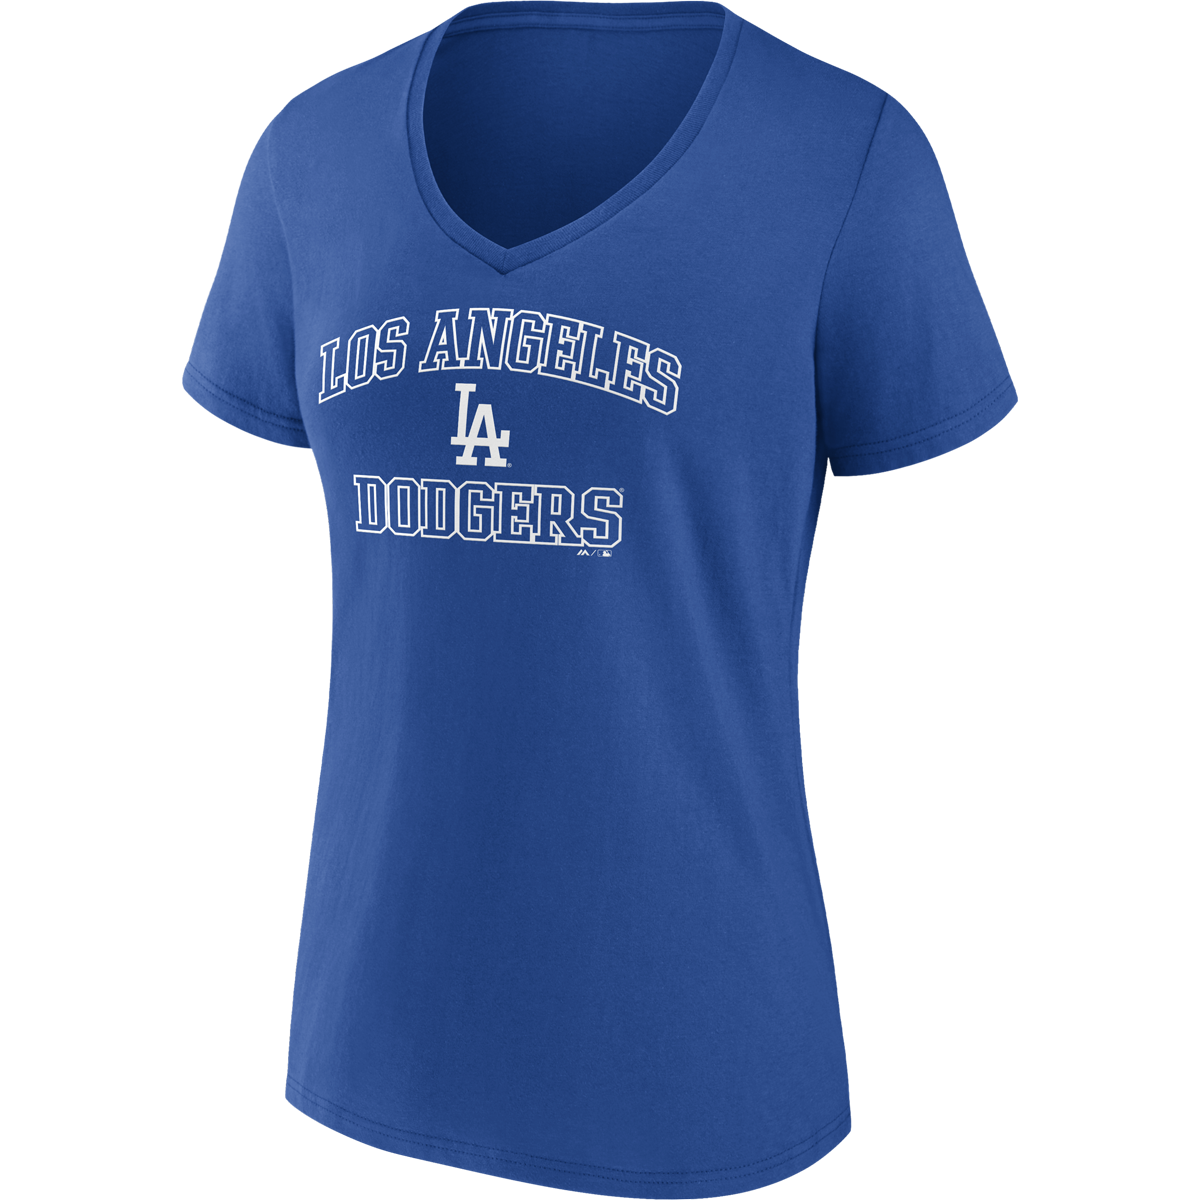 Women's Dodgers Cotton Heart and Soul Short Sleeve alternate view